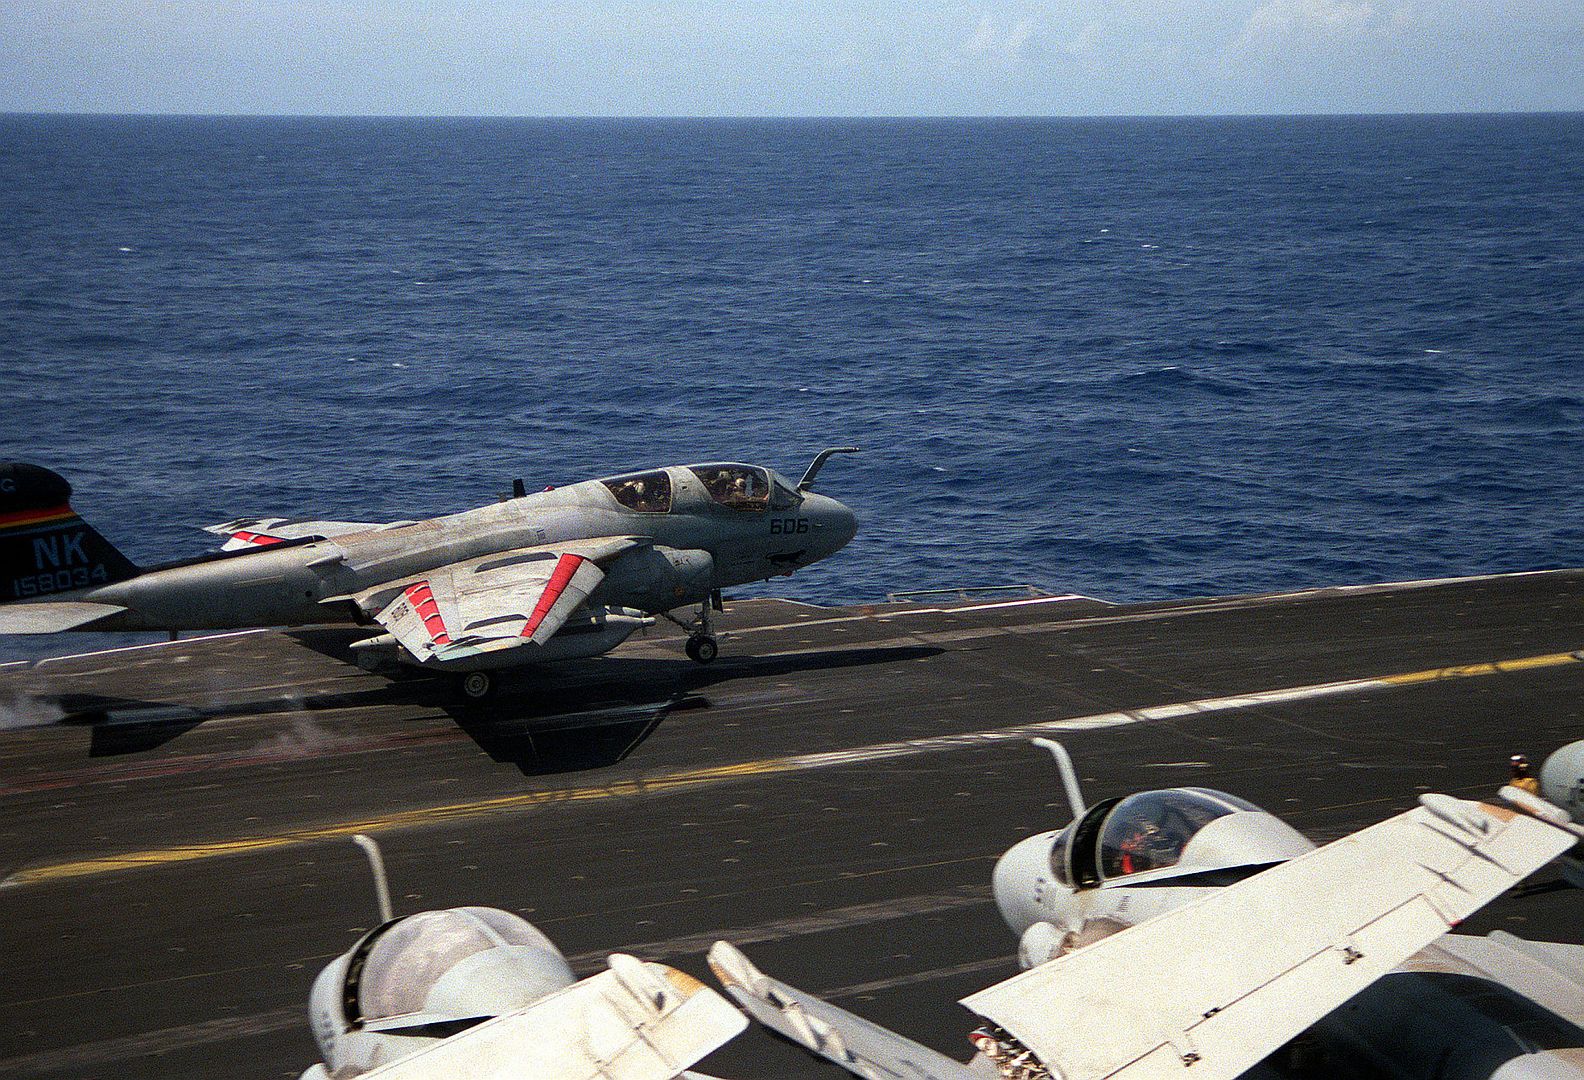 6B Prowler Aircraft Is Launched From The Aircraft Carrier USS INDEPENDENCE